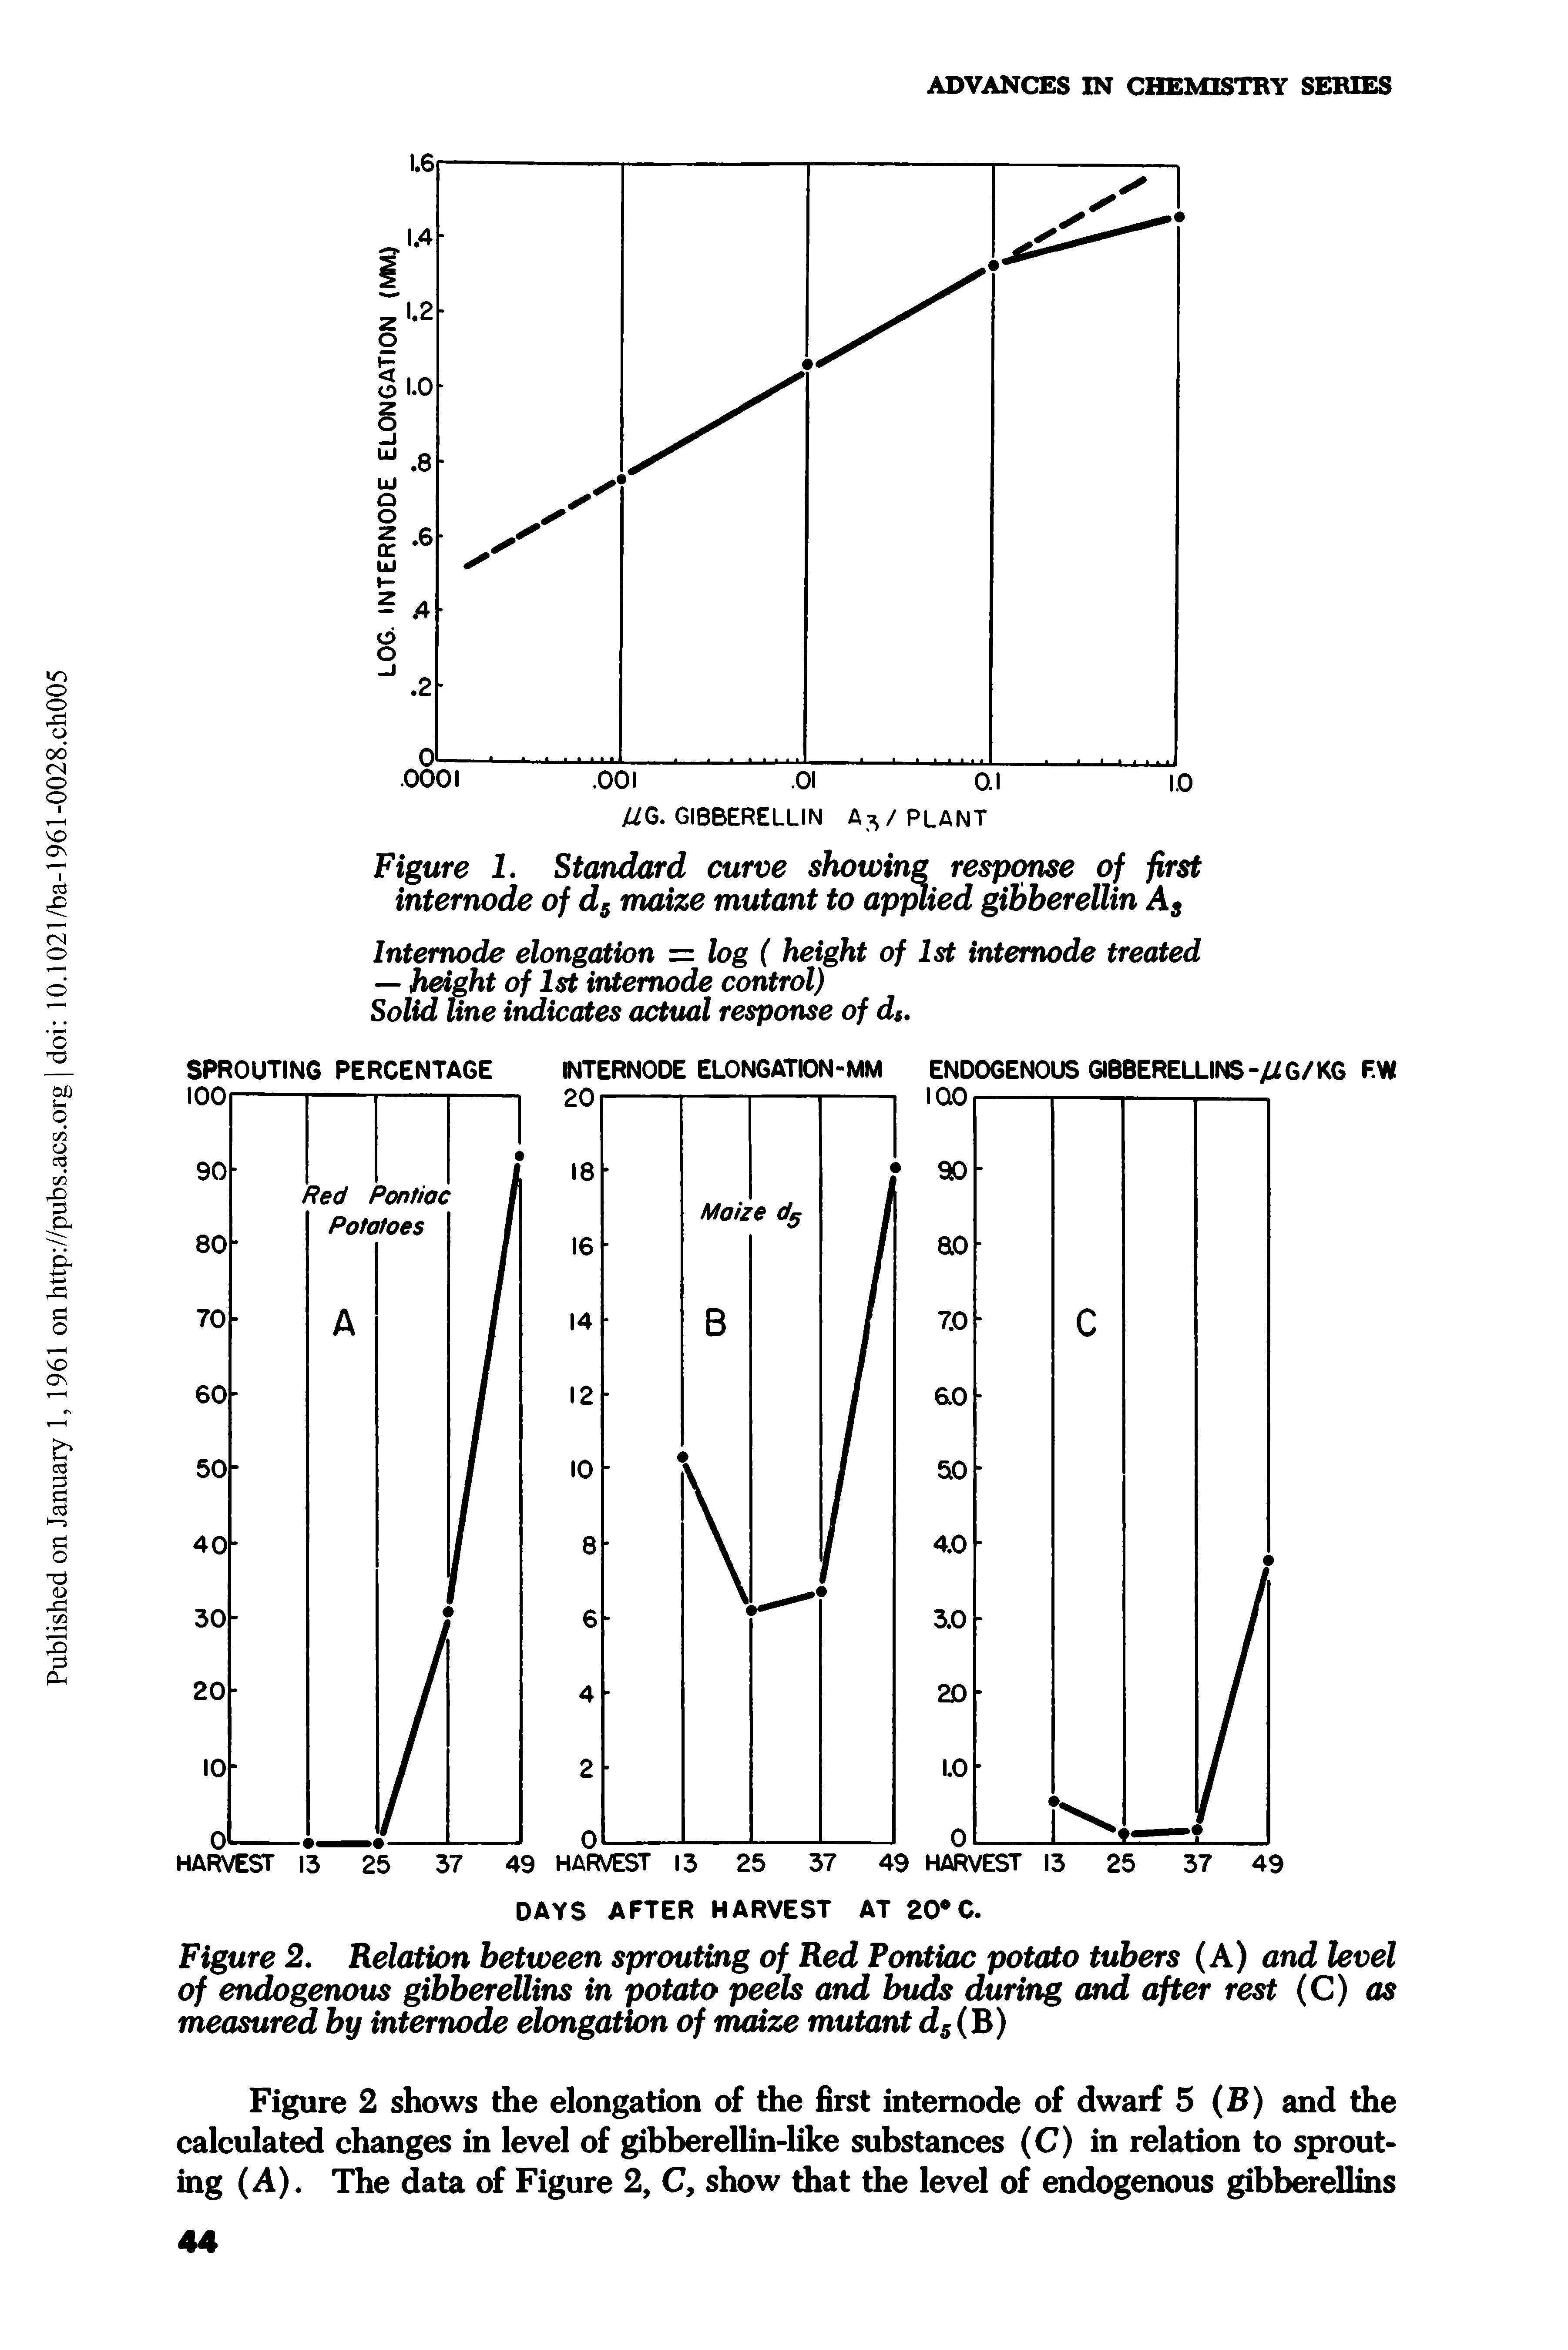 Figure 2 shows the elongation of the first intemode of dwarf 5 (B) and the calculated changes in level of gibberellin-like substances (C) in relation to sprouting (A). The data of Figure 2, C, show that the level of endogenous gibberellins...